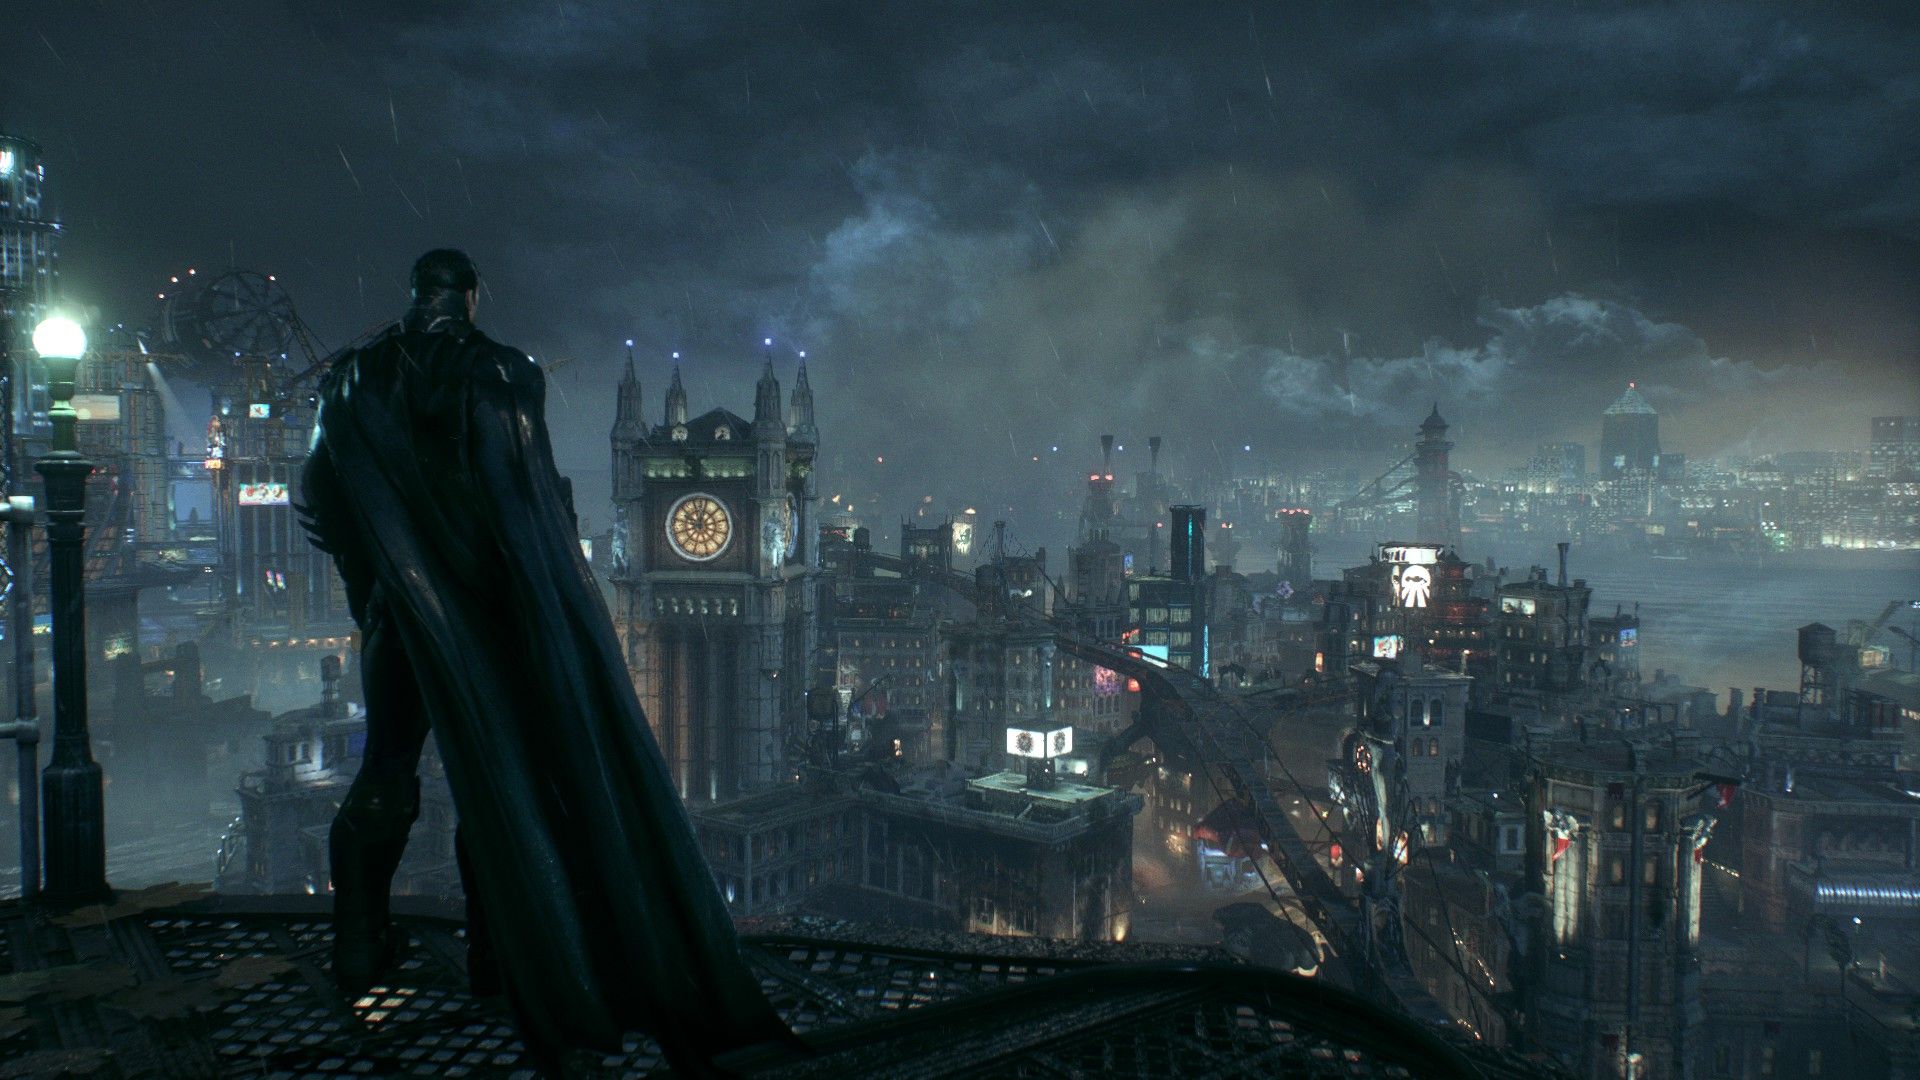 The Ultimate Guide To Gotham City For Fans Of The Batman